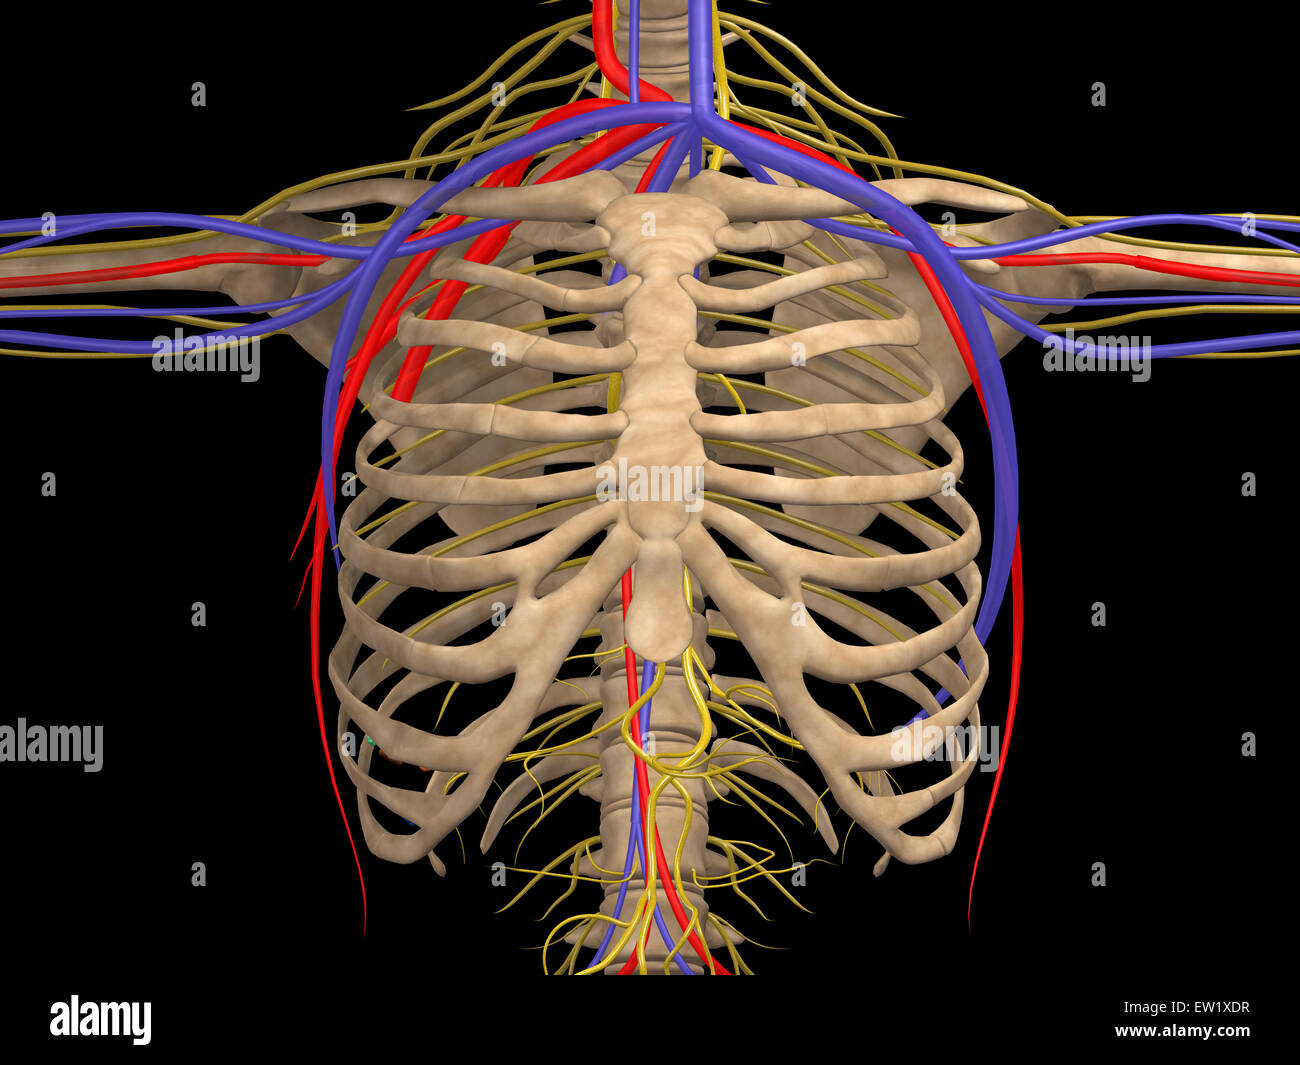 Rib cage with nerves, arteries and veins. Stock Photo